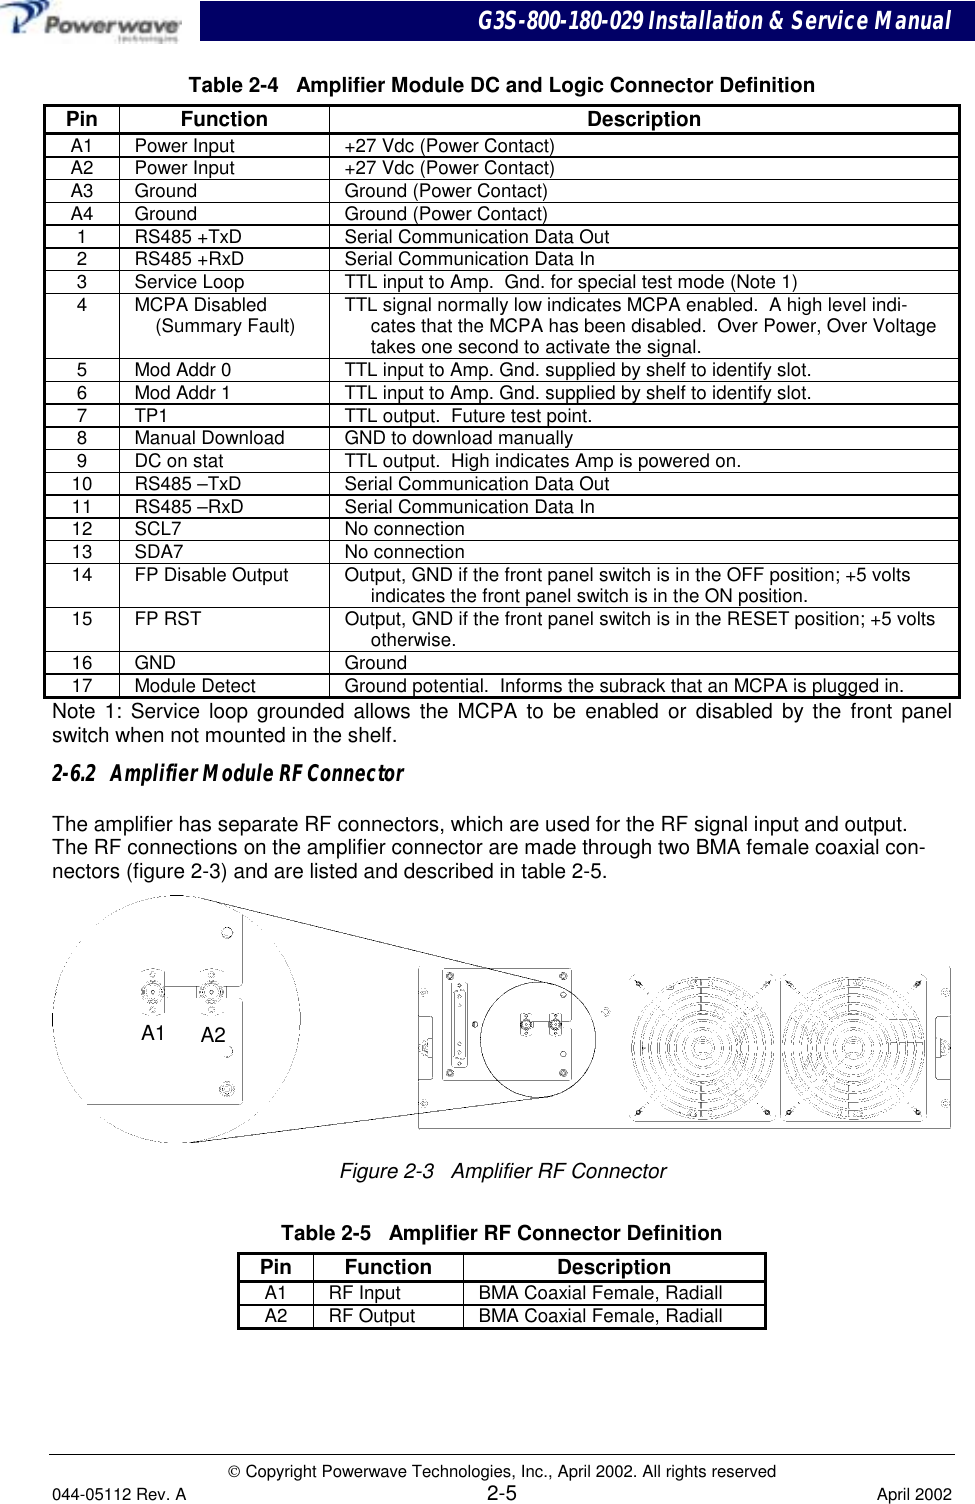 G3S-800-180-029 Installation &amp; Service Manual Copyright Powerwave Technologies, Inc., April 2002. All rights reserved044-05112 Rev. A 2-5 April 2002Table 2-4   Amplifier Module DC and Logic Connector DefinitionPin Function DescriptionA1 Power Input +27 Vdc (Power Contact)A2 Power Input +27 Vdc (Power Contact)A3 Ground Ground (Power Contact)A4 Ground Ground (Power Contact)1 RS485 +TxD Serial Communication Data Out2 RS485 +RxD Serial Communication Data In3 Service Loop TTL input to Amp.  Gnd. for special test mode (Note 1)4 MCPA Disabled(Summary Fault) TTL signal normally low indicates MCPA enabled.  A high level indi-cates that the MCPA has been disabled.  Over Power, Over Voltagetakes one second to activate the signal.5 Mod Addr 0 TTL input to Amp. Gnd. supplied by shelf to identify slot.6 Mod Addr 1 TTL input to Amp. Gnd. supplied by shelf to identify slot.7 TP1 TTL output.  Future test point.8 Manual Download GND to download manually9 DC on stat TTL output.  High indicates Amp is powered on.10 RS485 –TxD Serial Communication Data Out11 RS485 –RxD Serial Communication Data In12 SCL7 No connection13 SDA7 No connection14 FP Disable Output Output, GND if the front panel switch is in the OFF position; +5 voltsindicates the front panel switch is in the ON position.15 FP RST Output, GND if the front panel switch is in the RESET position; +5 voltsotherwise.16 GND Ground17 Module Detect Ground potential.  Informs the subrack that an MCPA is plugged in.Note 1: Service loop grounded allows the MCPA to be enabled or disabled by the front panelswitch when not mounted in the shelf.2-6.2   Amplifier Module RF ConnectorThe amplifier has separate RF connectors, which are used for the RF signal input and output.The RF connections on the amplifier connector are made through two BMA female coaxial con-nectors (figure 2-3) and are listed and described in table 2-5.Figure 2-3   Amplifier RF ConnectorTable 2-5   Amplifier RF Connector DefinitionPin Function DescriptionA1 RF Input BMA Coaxial Female, RadiallA2 RF Output BMA Coaxial Female, RadiallA1 A2